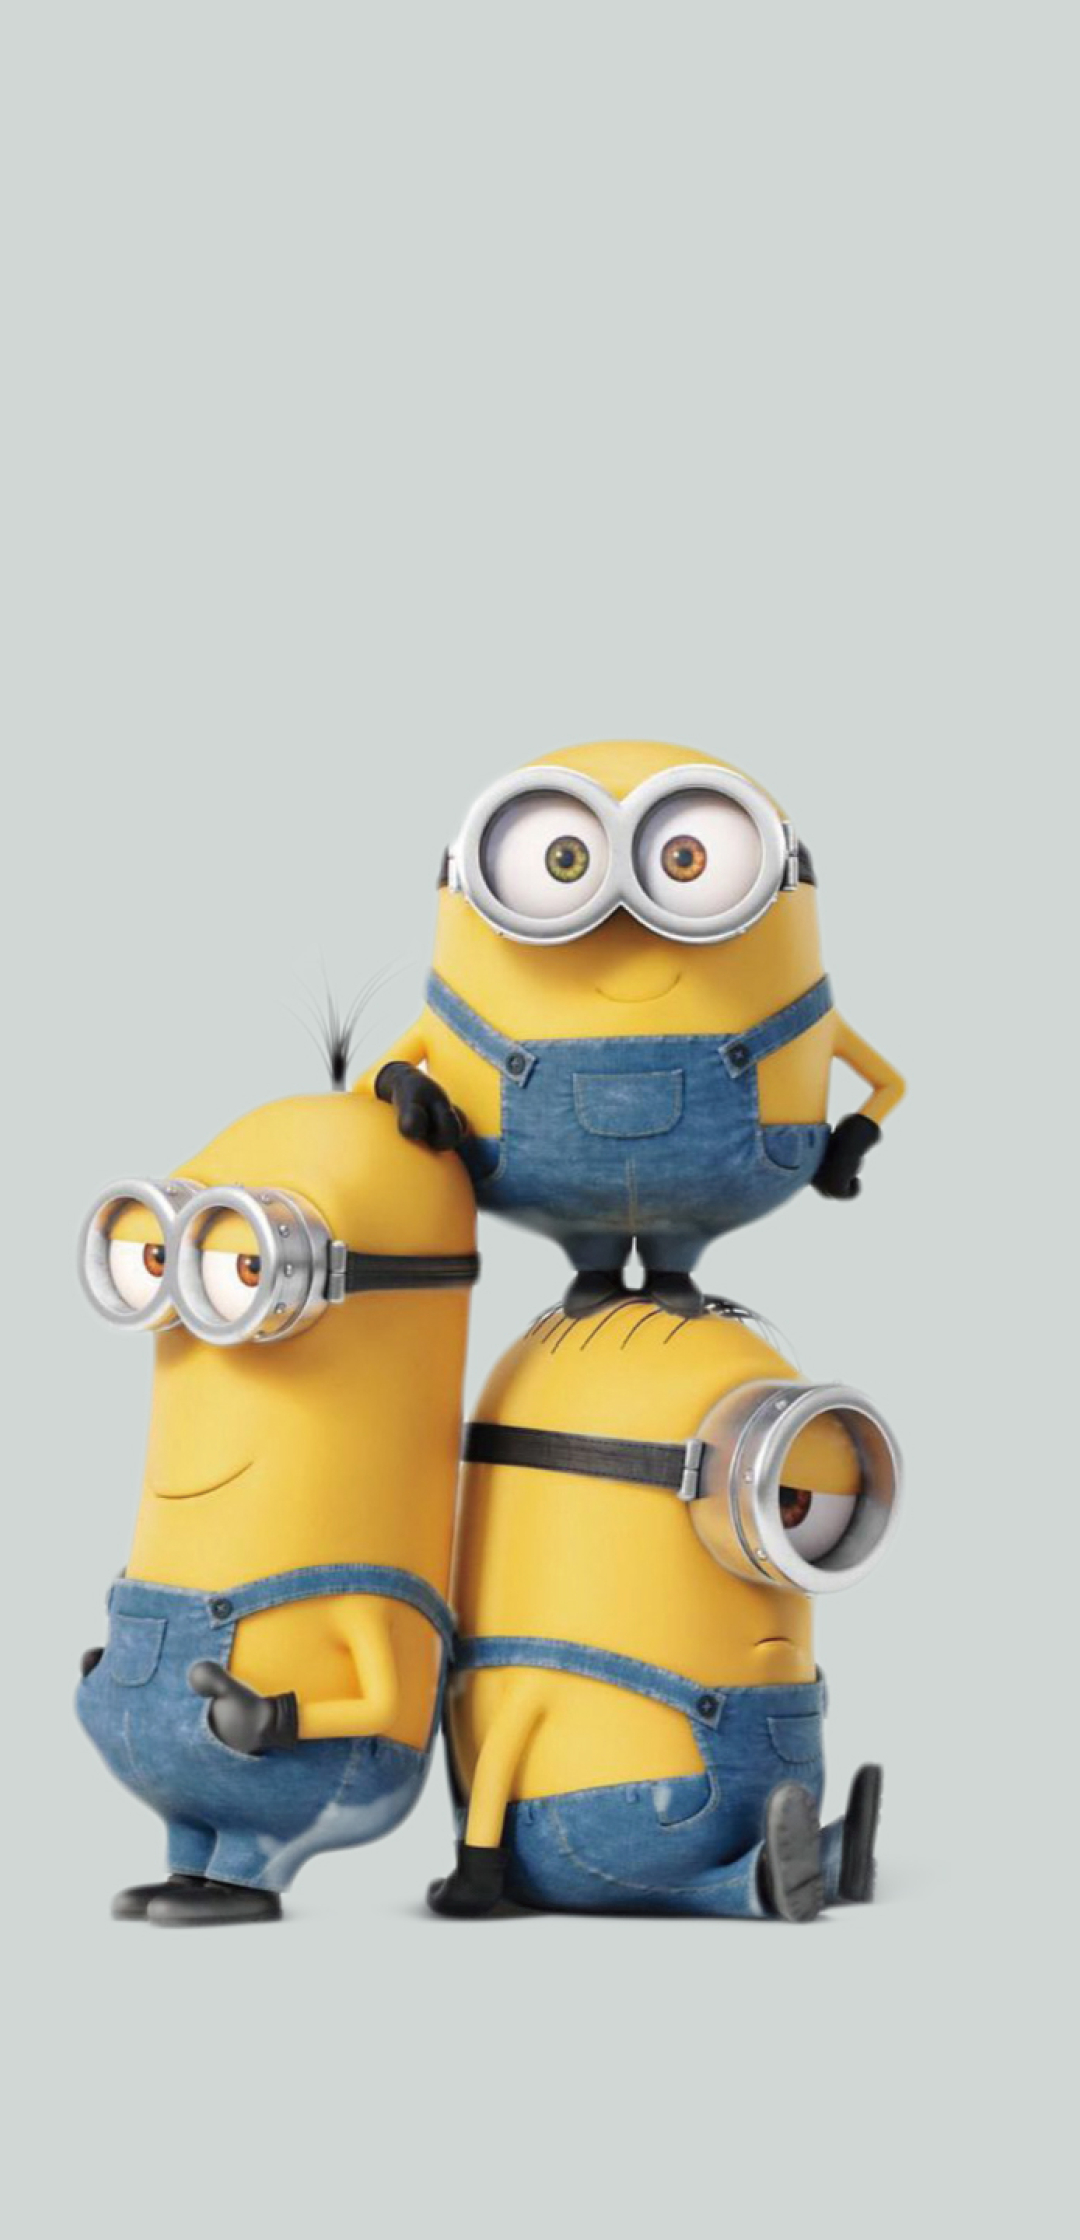 1080x2240 Poster Of Minions Movie 1080x2240 Resolution Wallpaper Hd Movies 4k Wallpapers Images Photos And Background Wallpapers Den